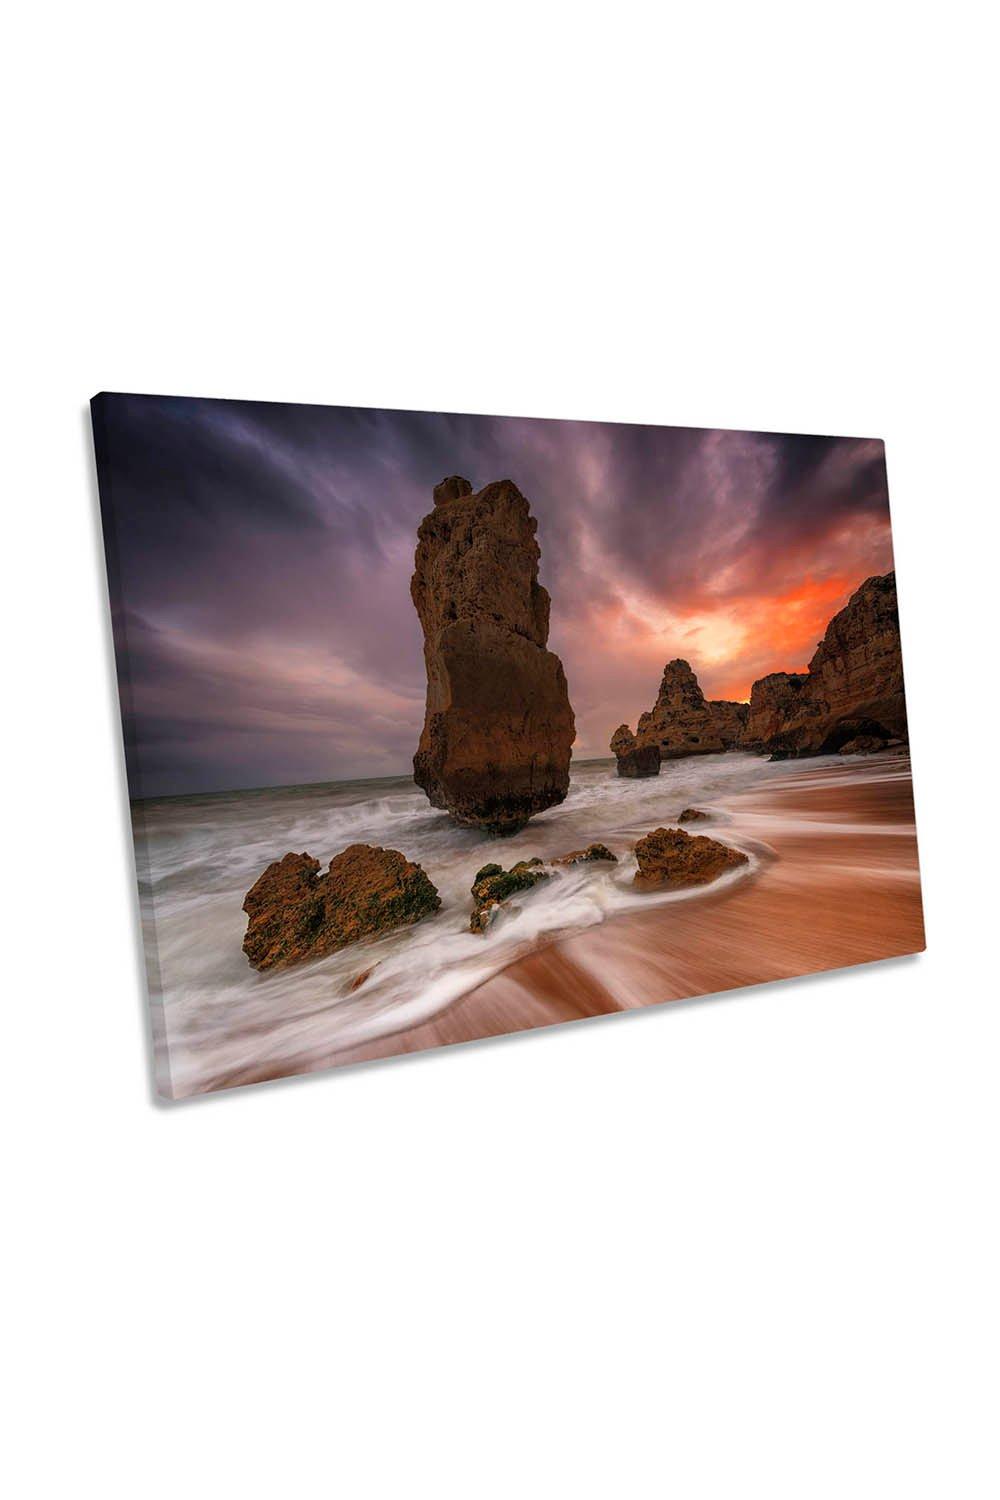 Totem Algarve Portugal Beach Sunset Canvas Wall Art Picture Print